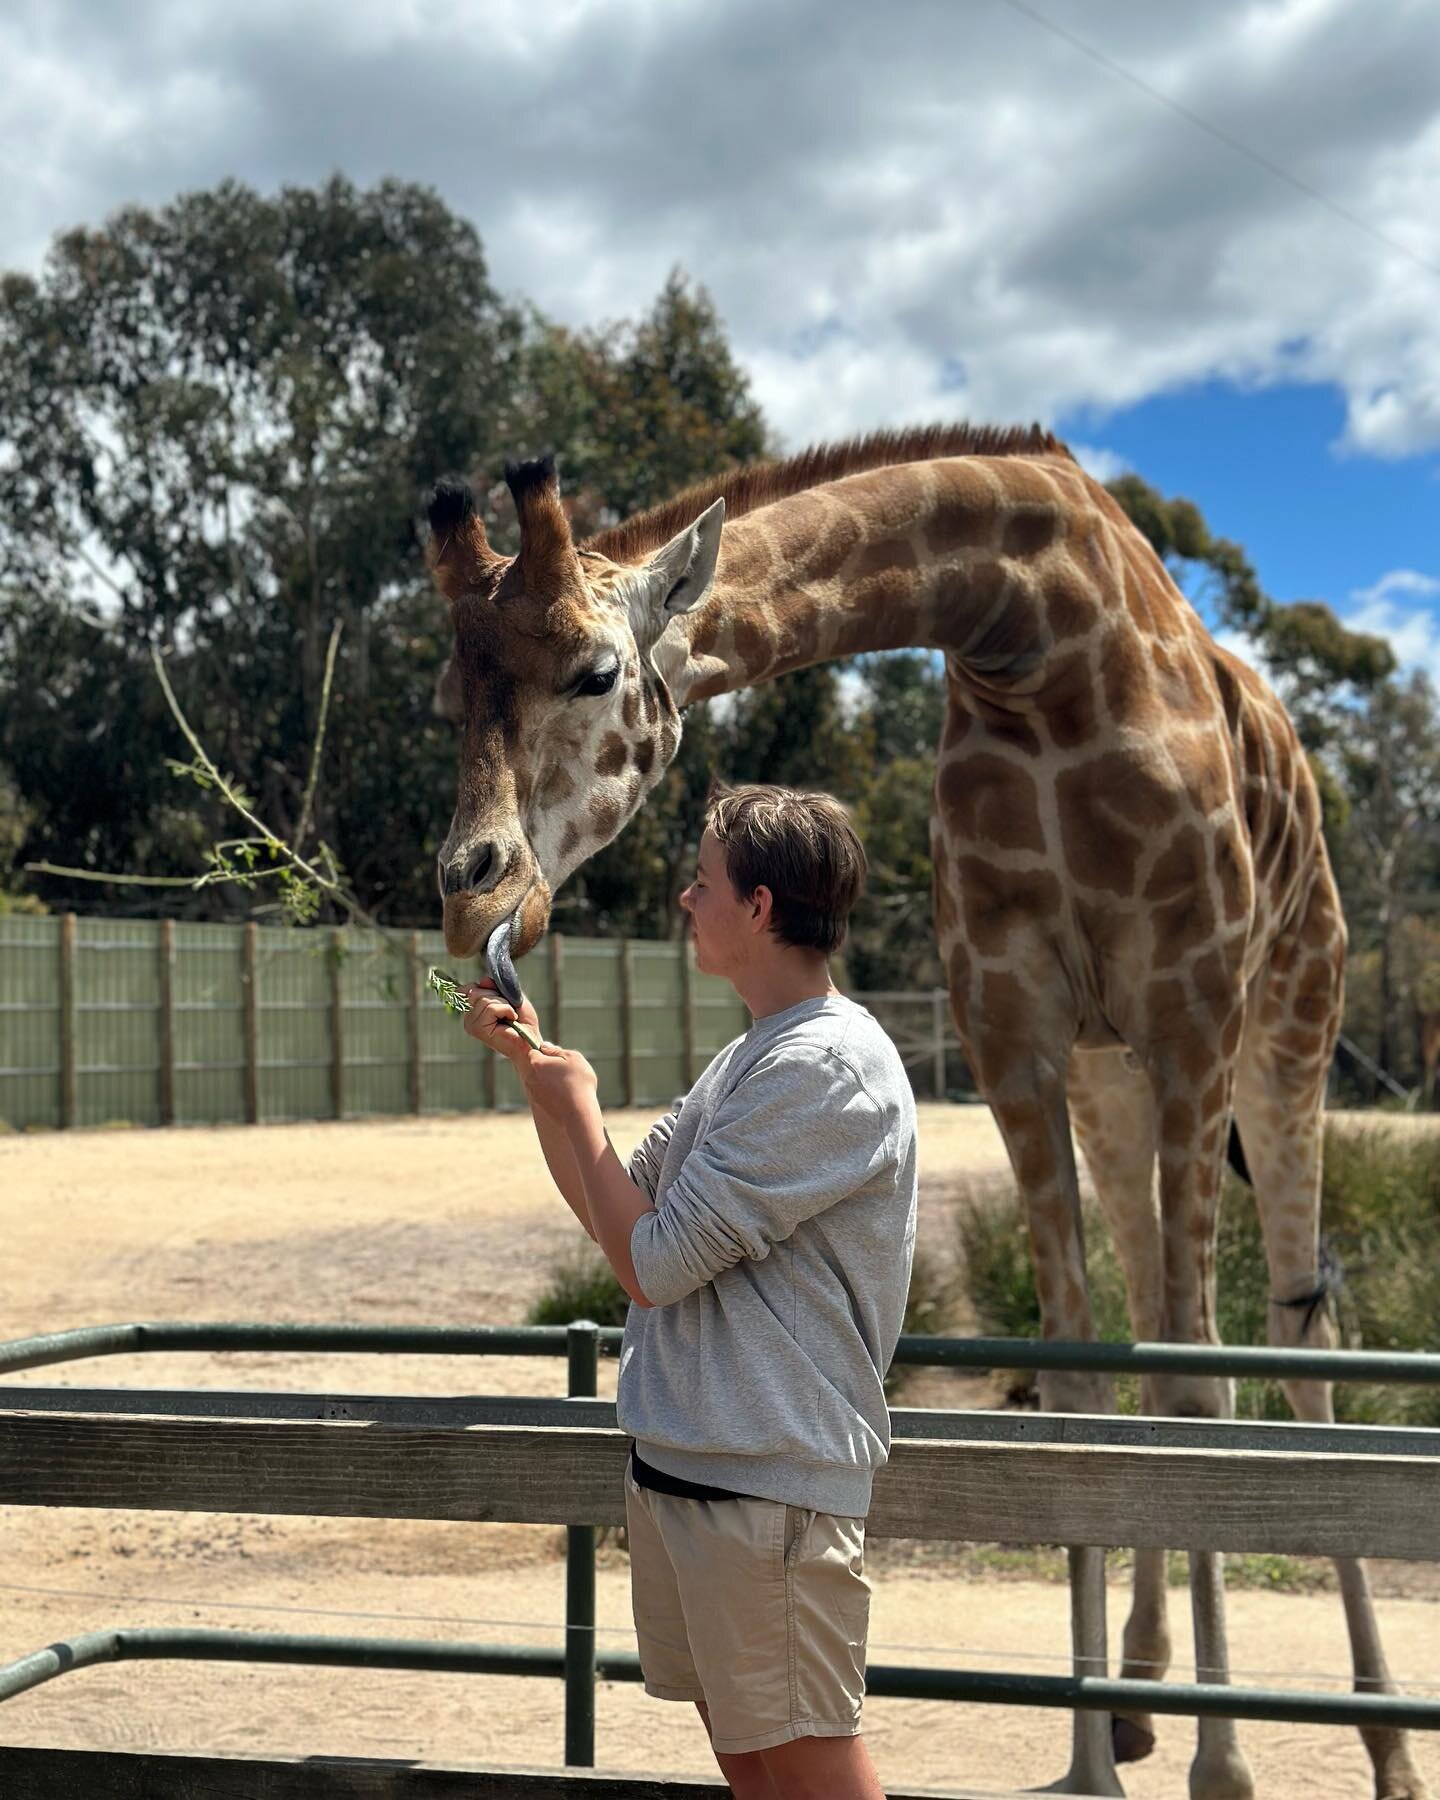 Jeremy, Layla and Millyca were lucky enough to get up close and personal with the beautiful giraffes who stole their hearts. 🦒 
Did you know: A giraffe heart weighs approximately 11 kilograms with an average resting heart rate of 40-90 beats per min